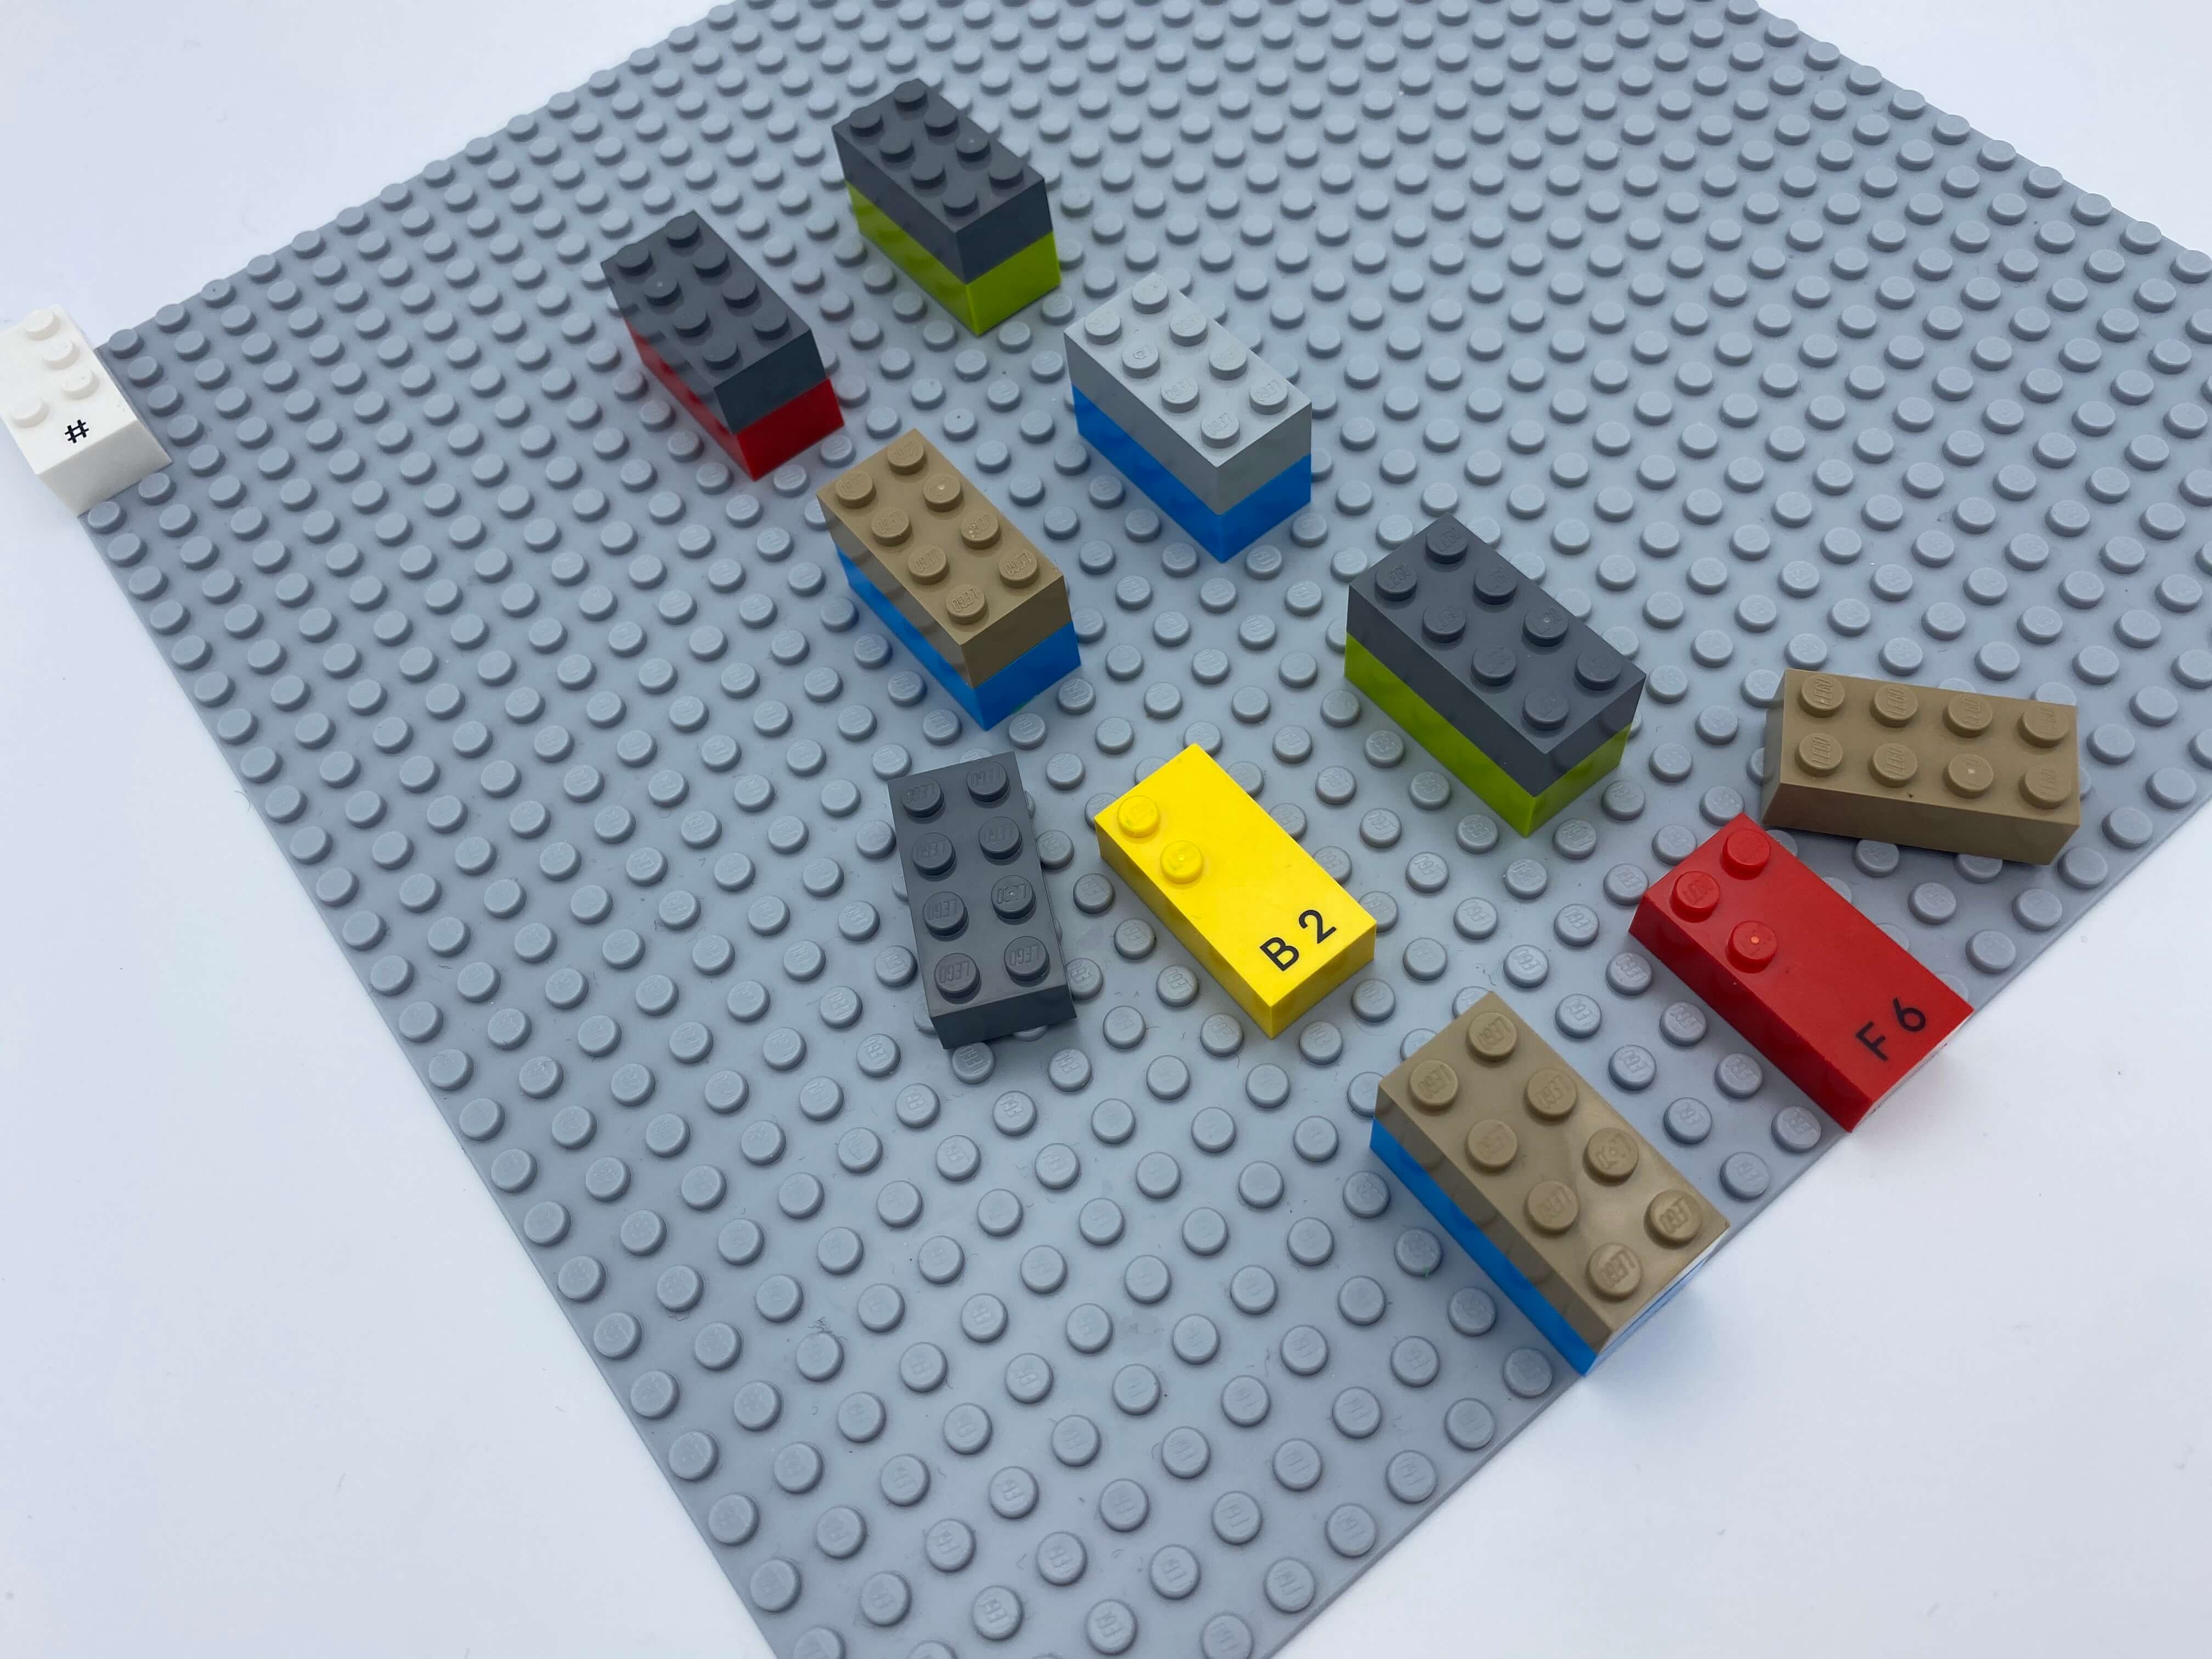 Exemple of base plate preparation using classic LEGO bricks to cover the number bricks.